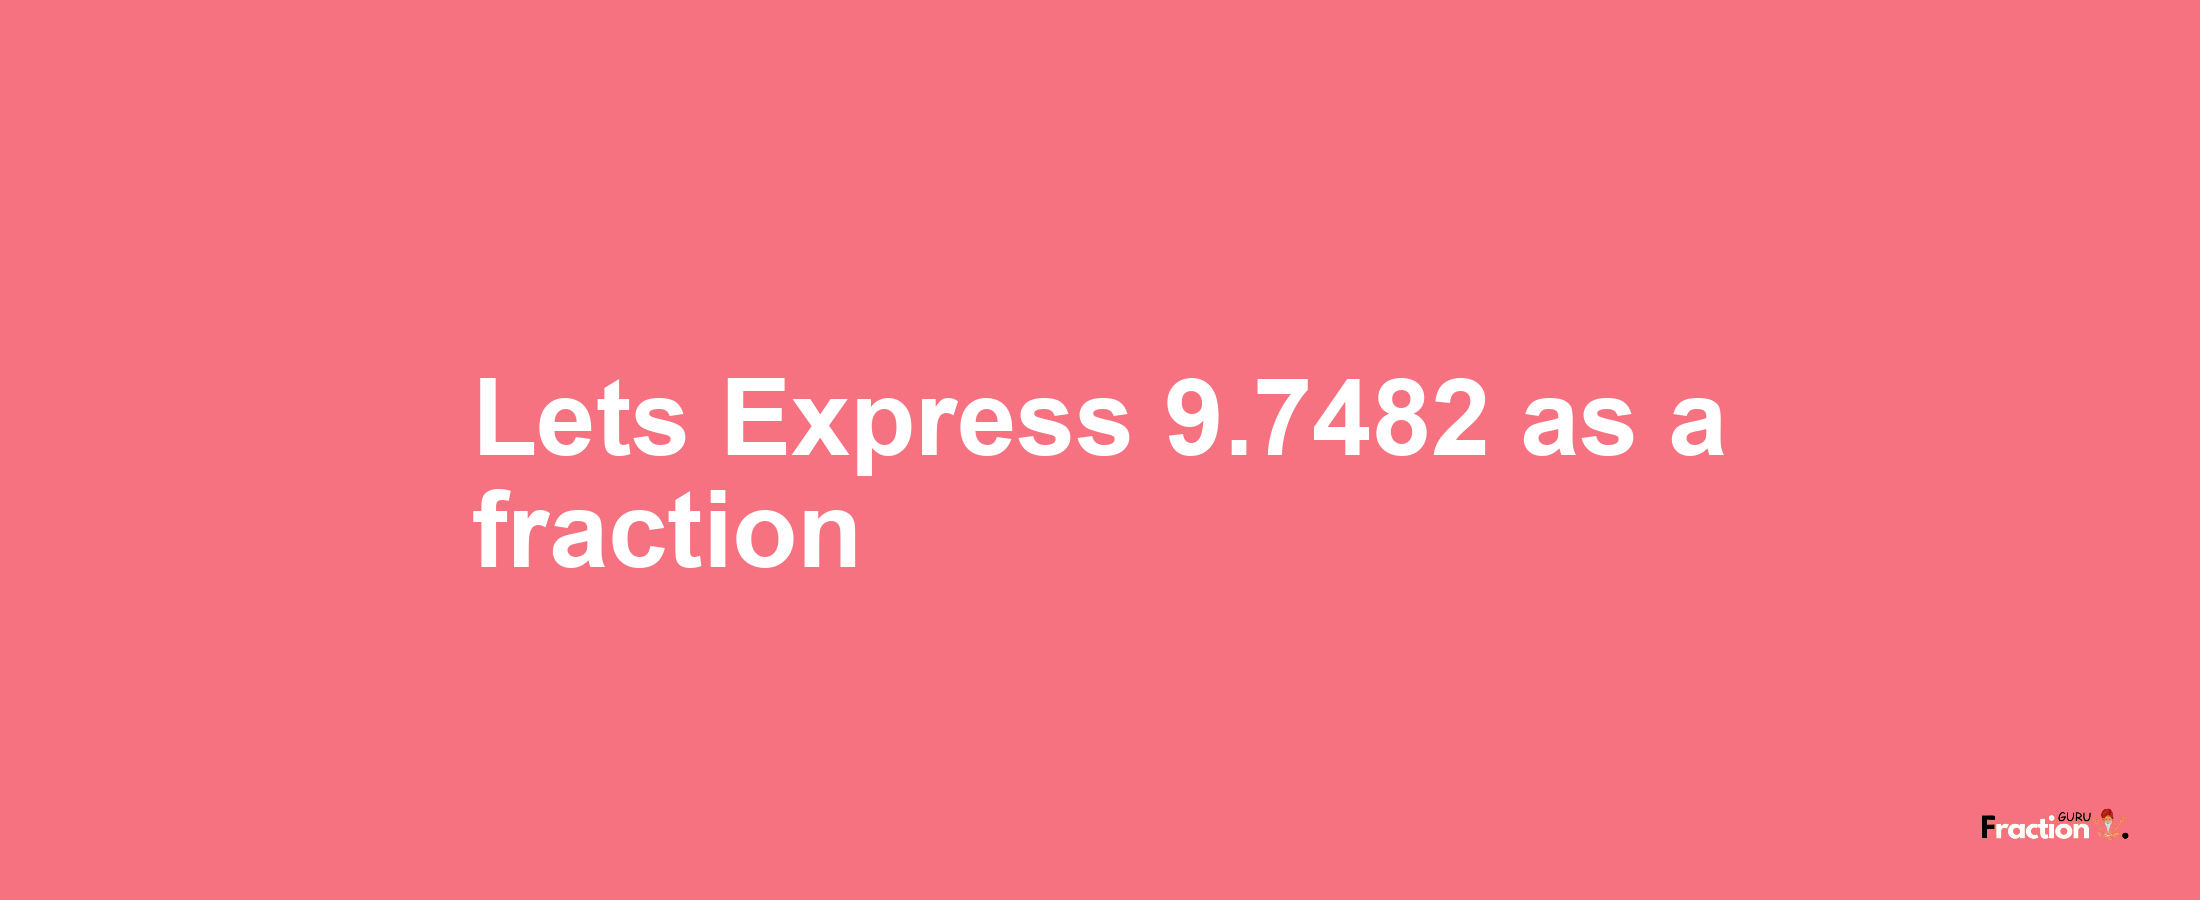 Lets Express 9.7482 as afraction